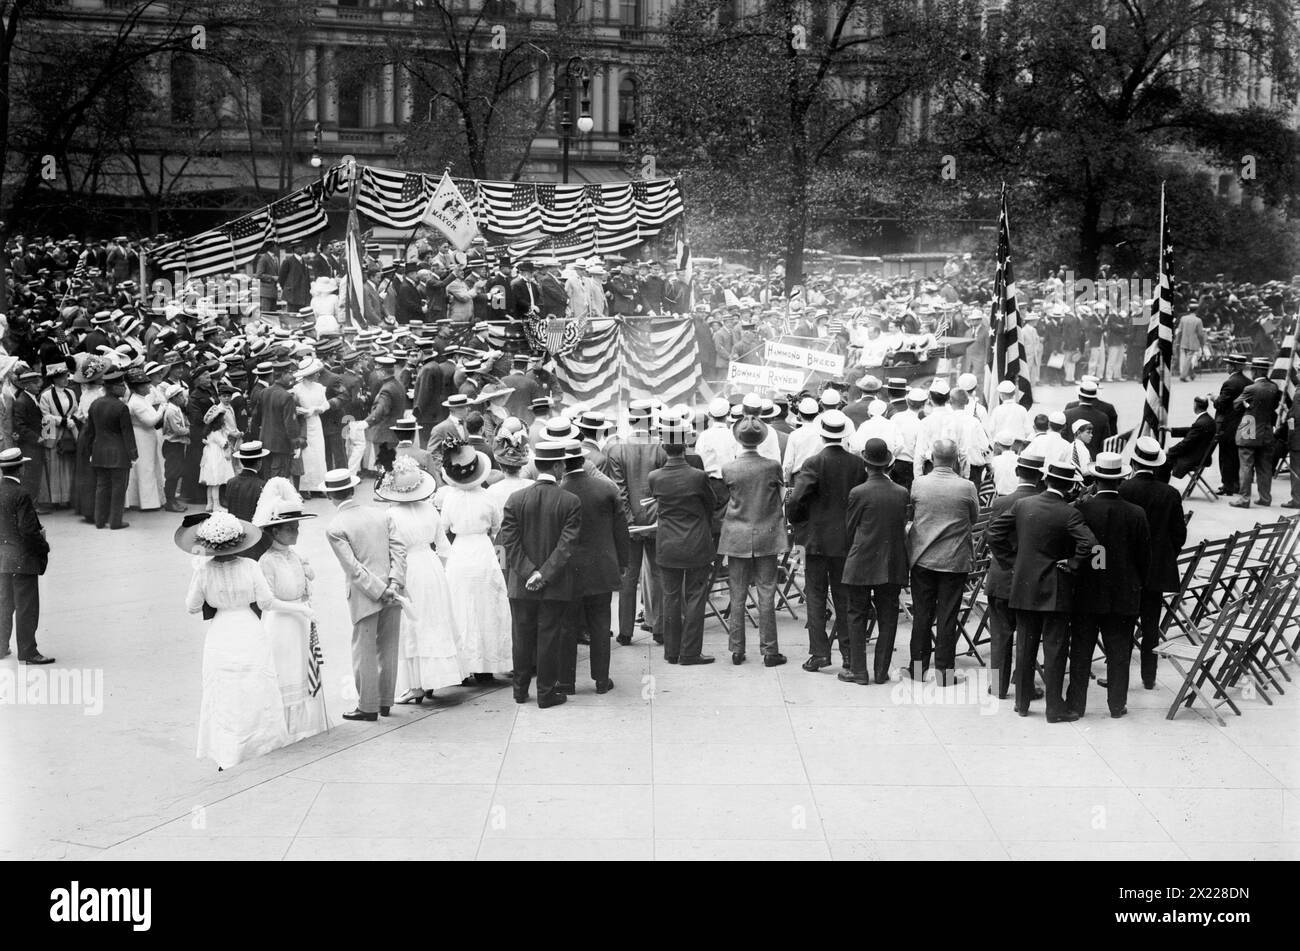 Mayor reviews Olympic Athletes, 1912. Showing Mayor William J. Gaynor and others at a parade greeting the U.S. athletes who competed in the 5th Olympic Games, held in Stockholm, Sweden in 1912. In the reviewing stand are Dr. George F. Kunz (in top hat) and (left to right from Kunz), Mayor William Gaynor; U.S. Olympic Commissioner James Edward Sullivan (1862-1914) and Justice Victor J. Dowling (1866-1934). Stock Photo